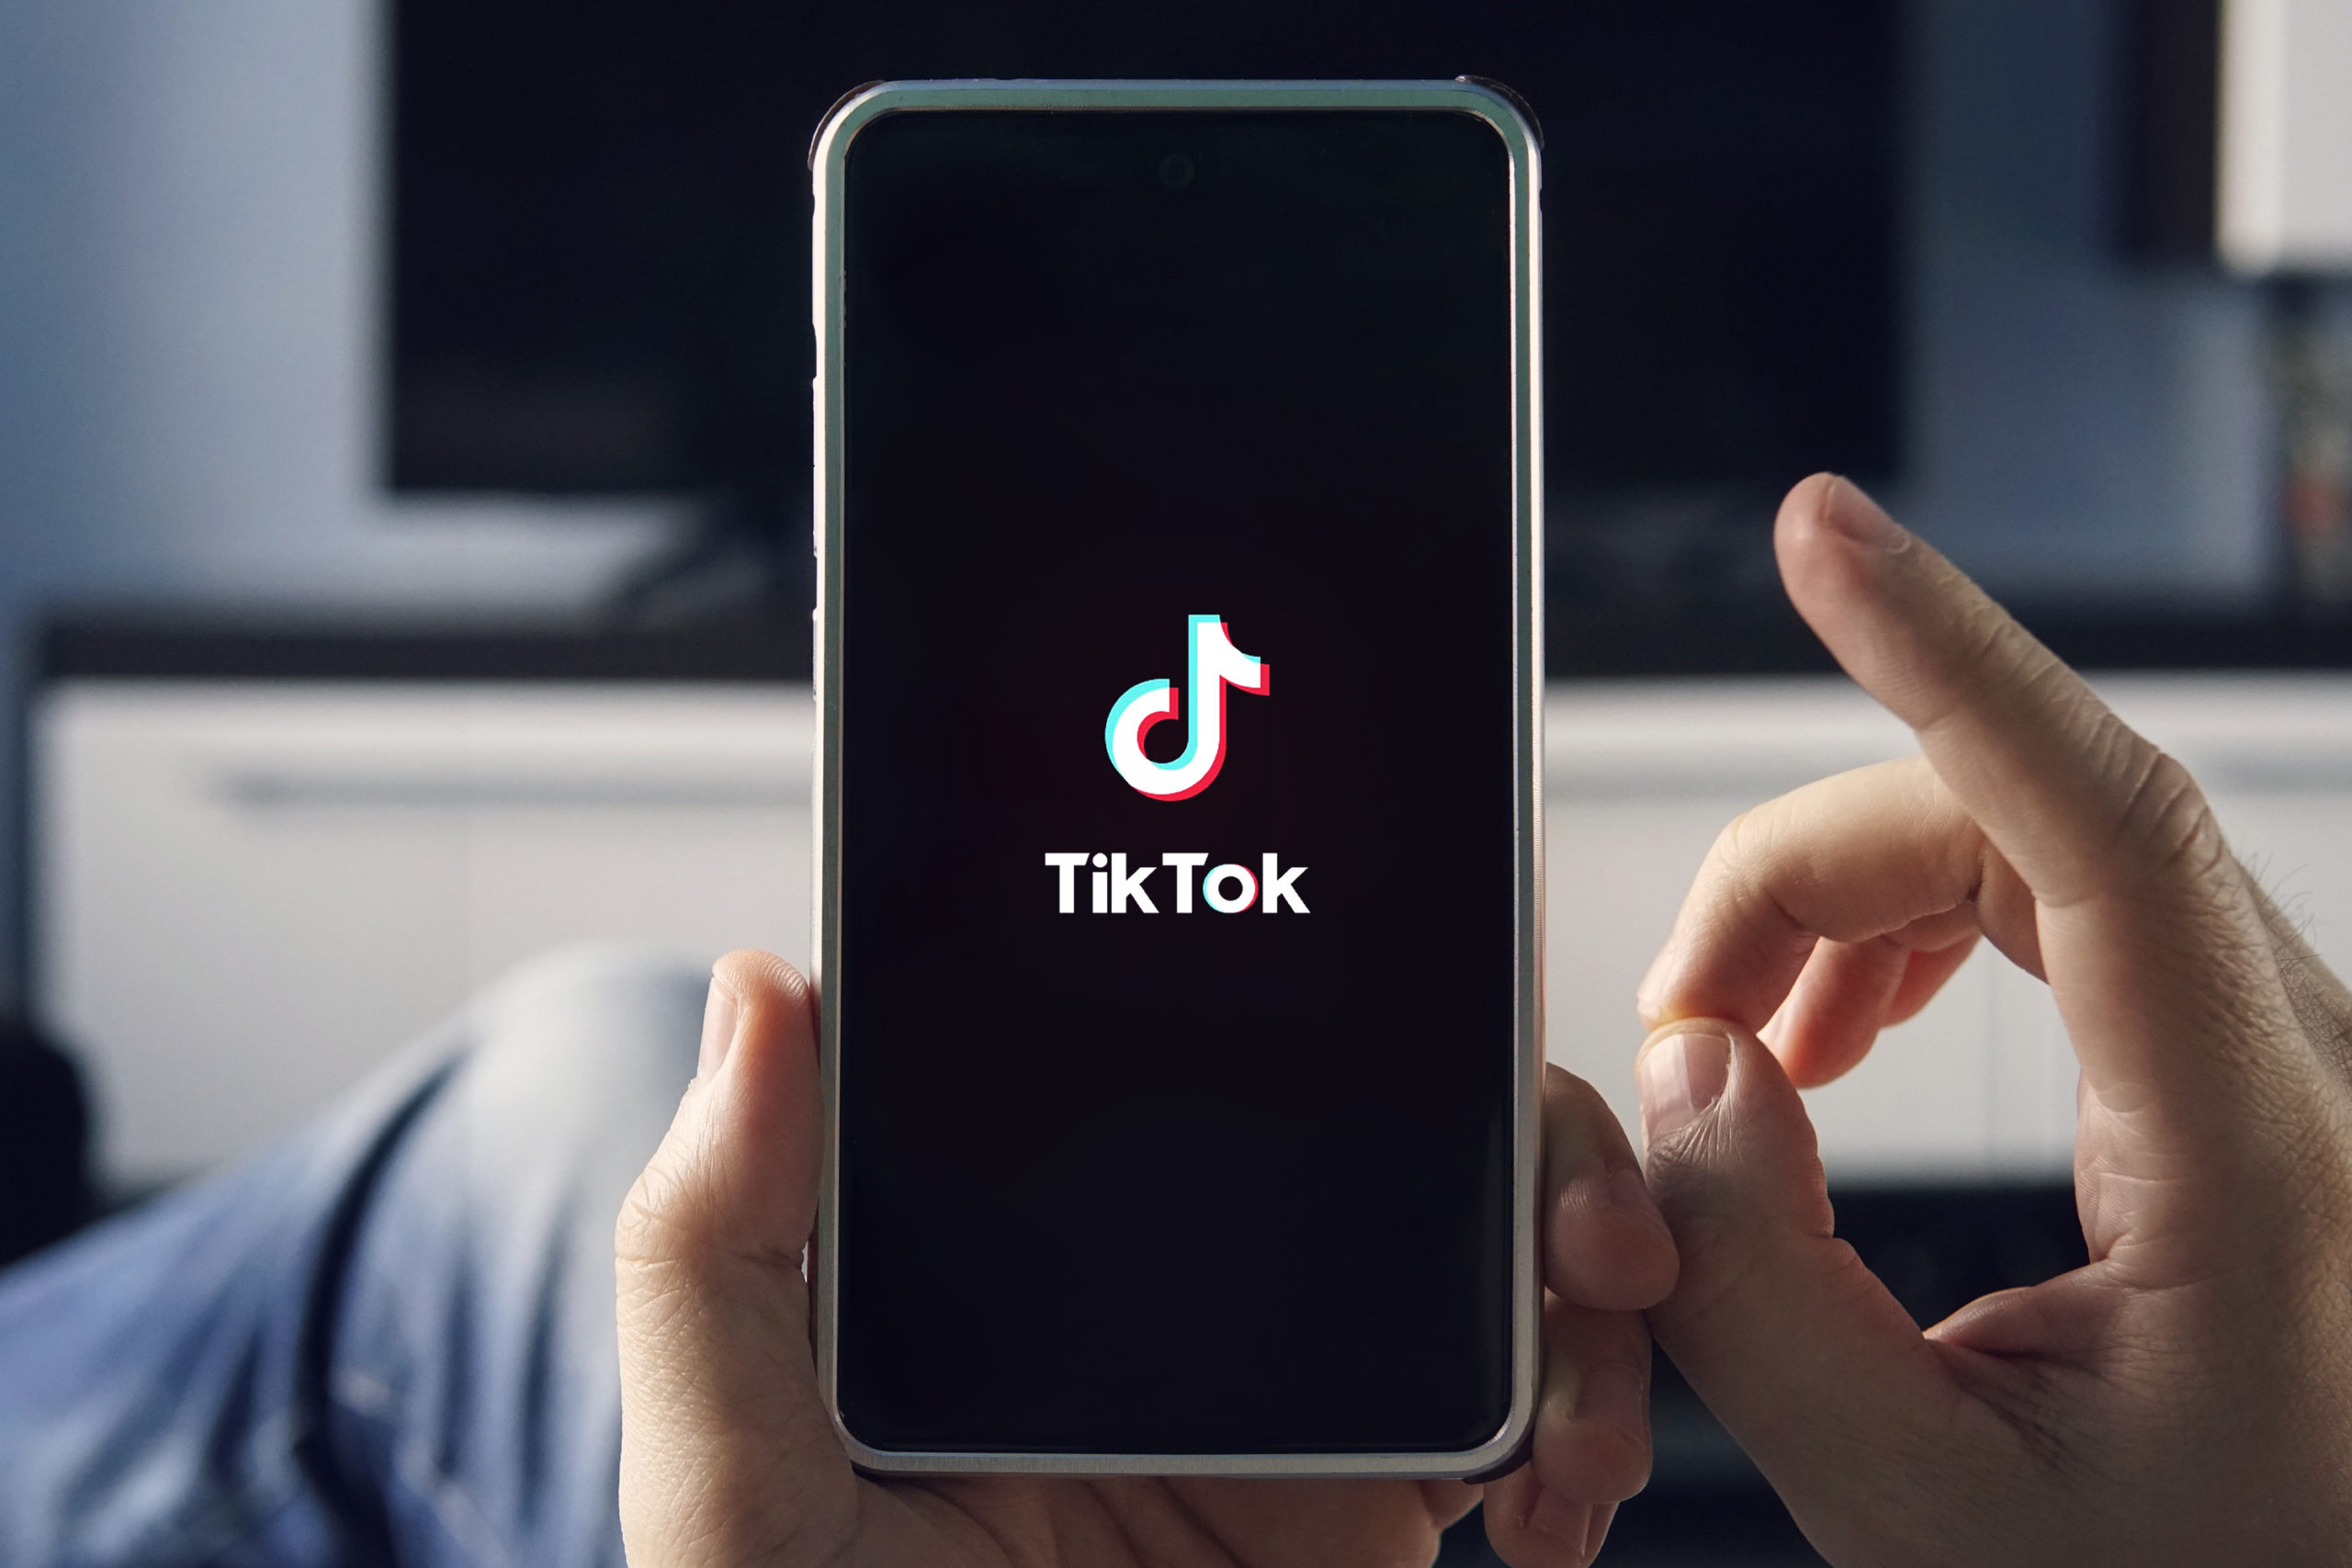 how-to-edit-duration-of-photos-on-tiktok-on-phone-2022